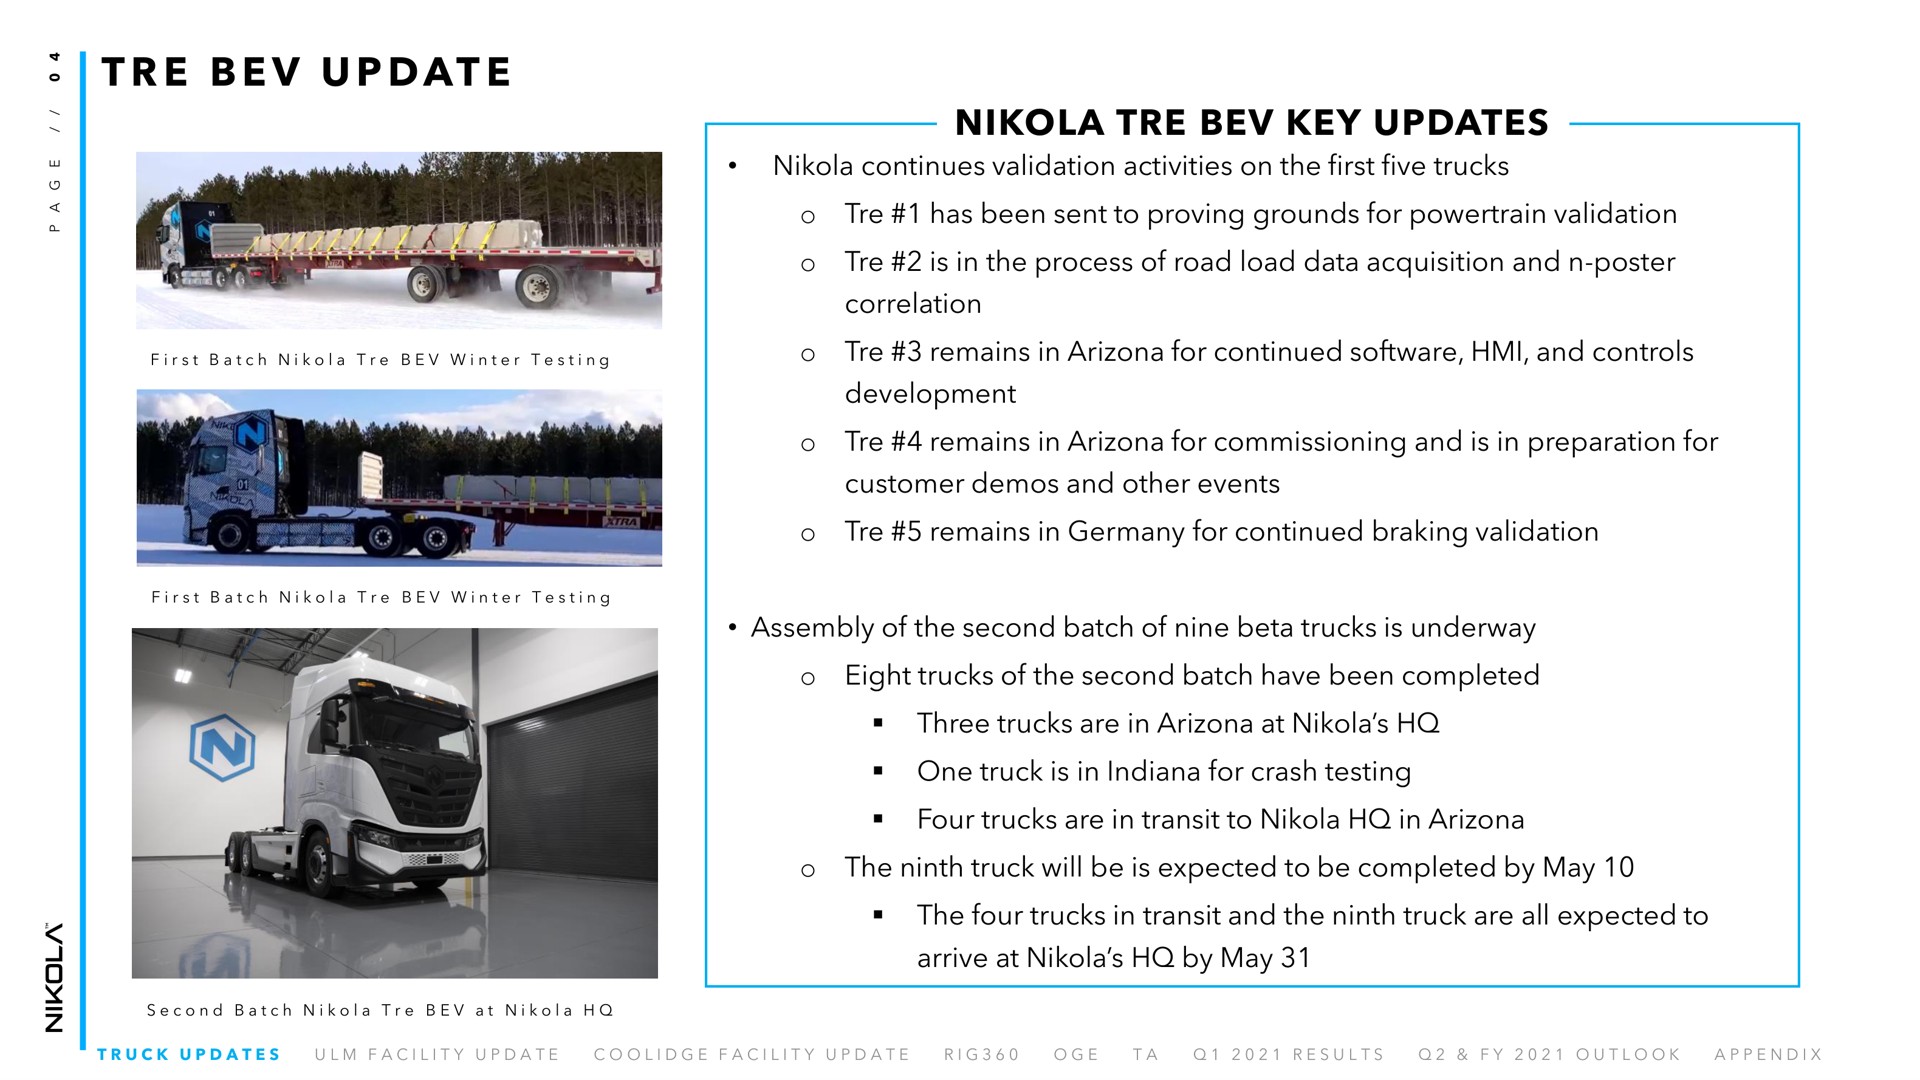 at key updates update eight trucks of the second batch have been completed | Nikola